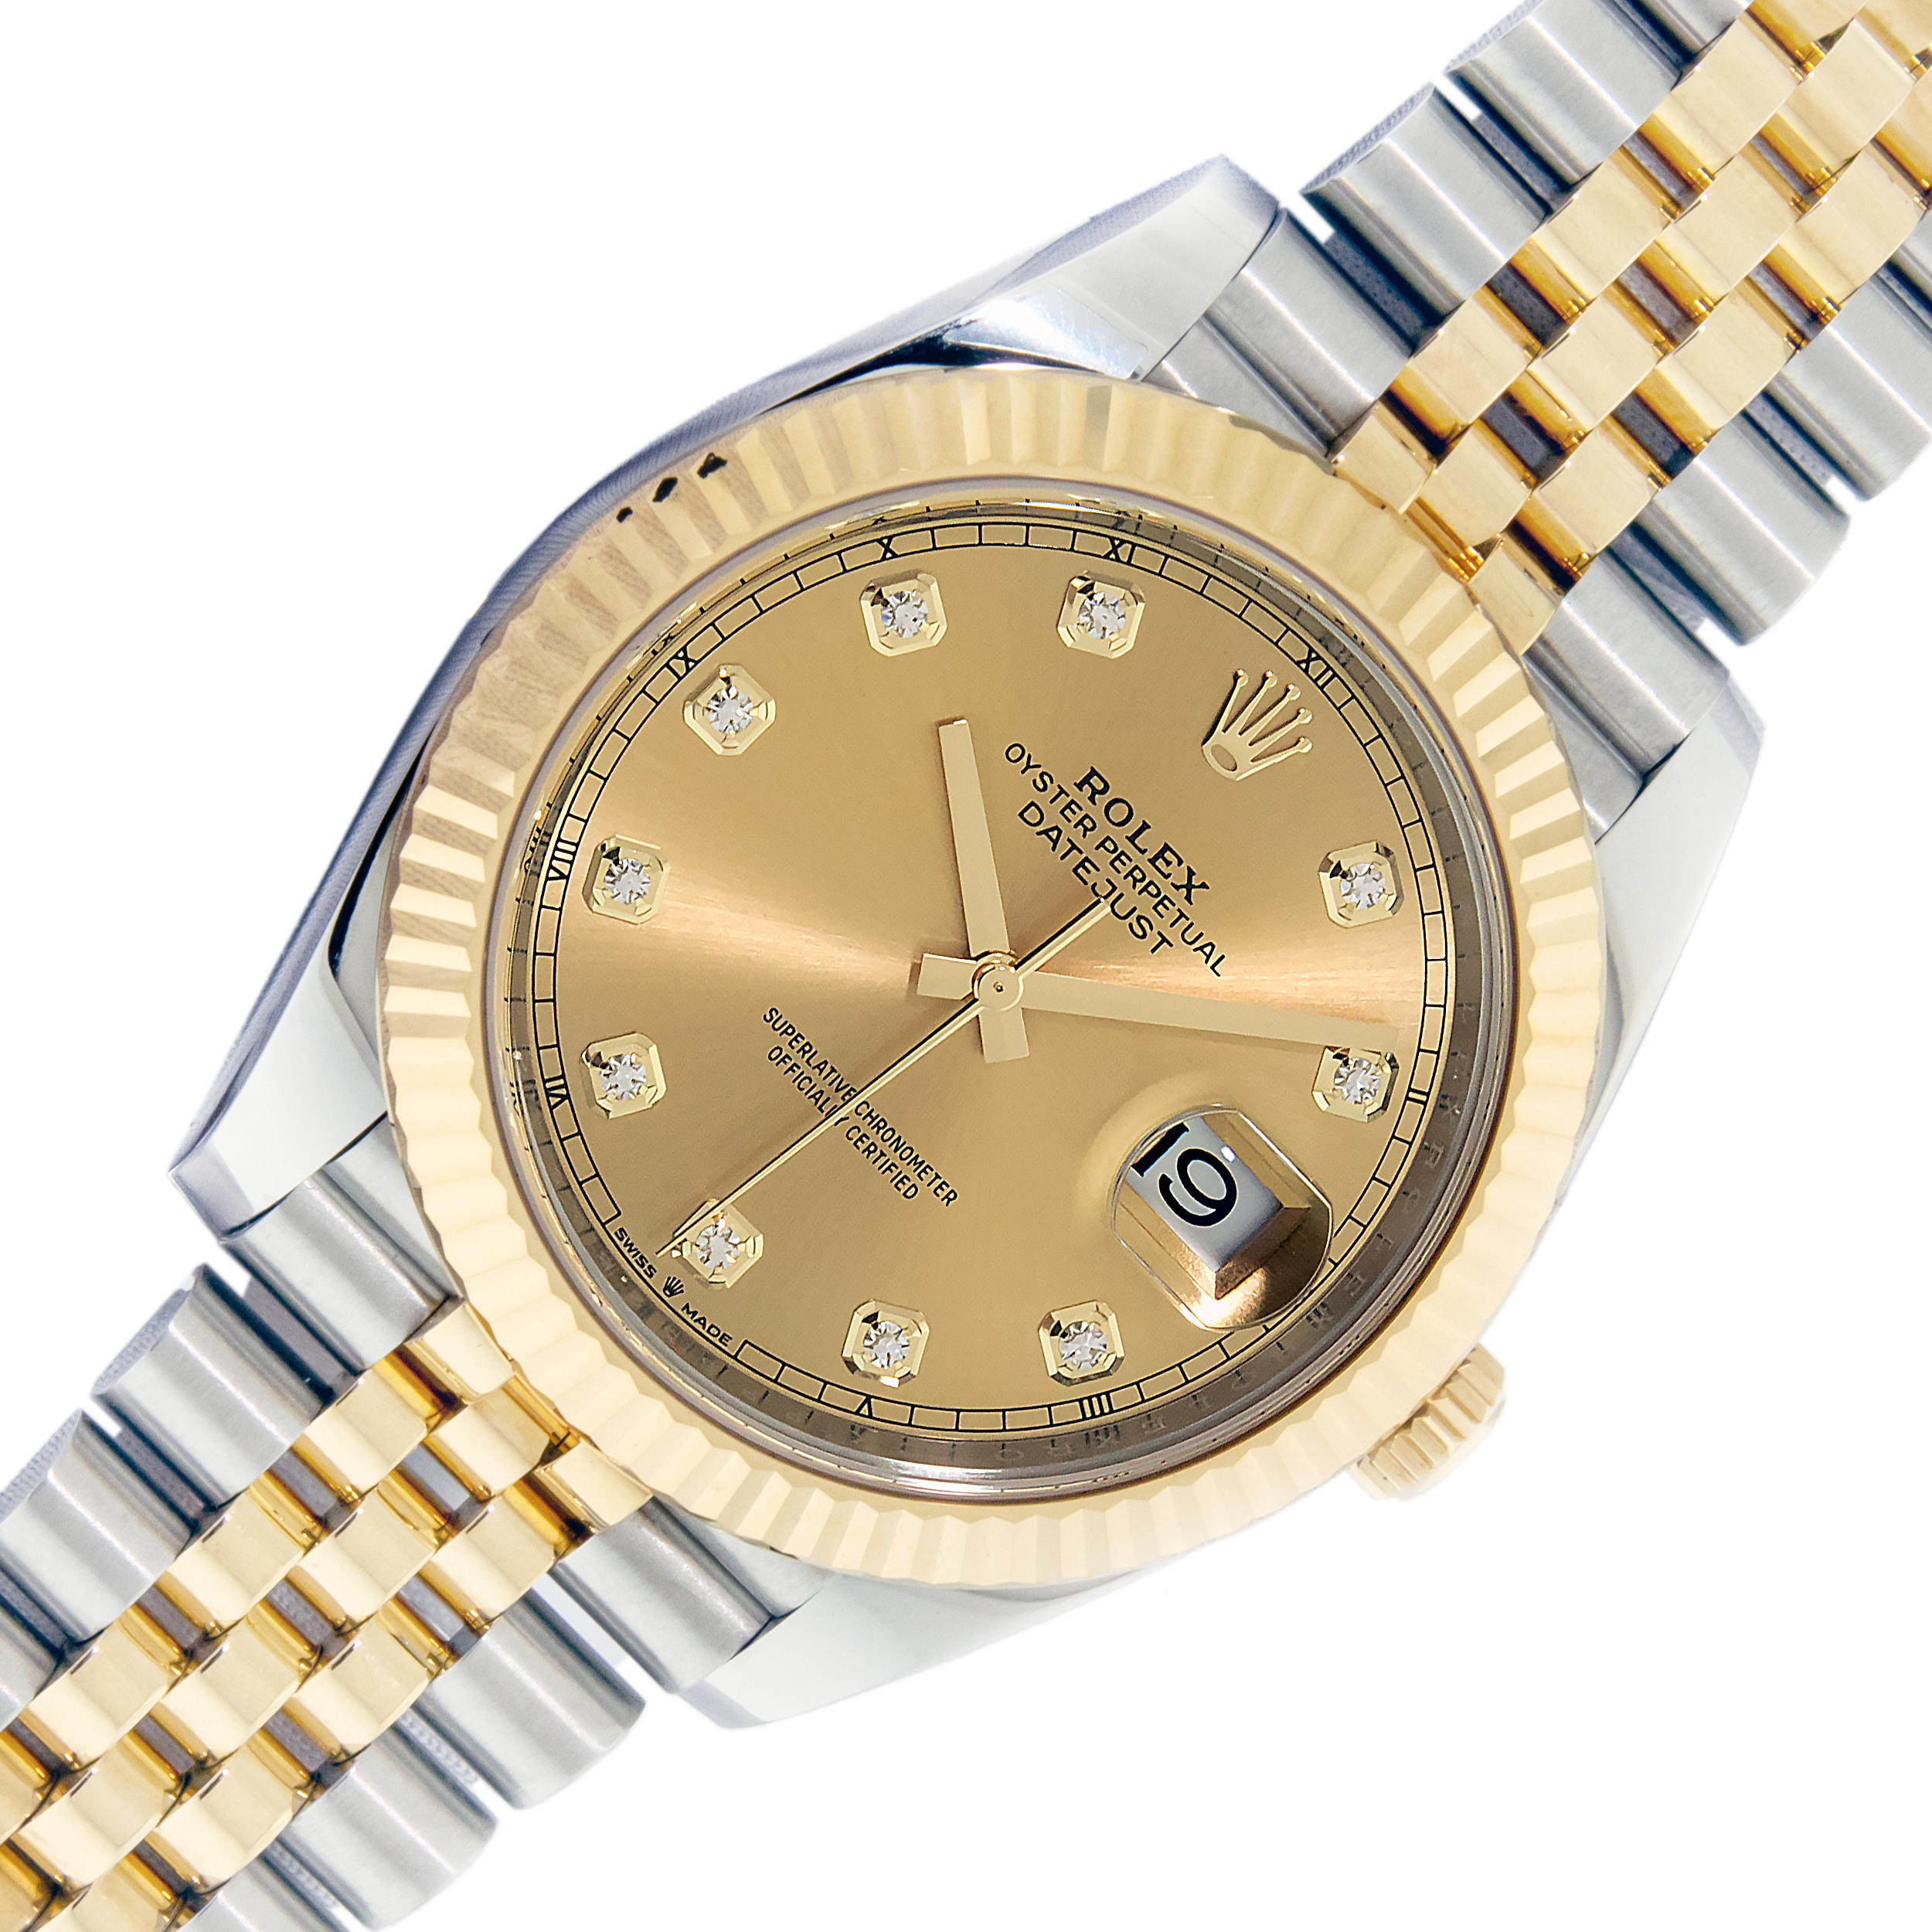 Preowned & Used Rolex Mens Watches